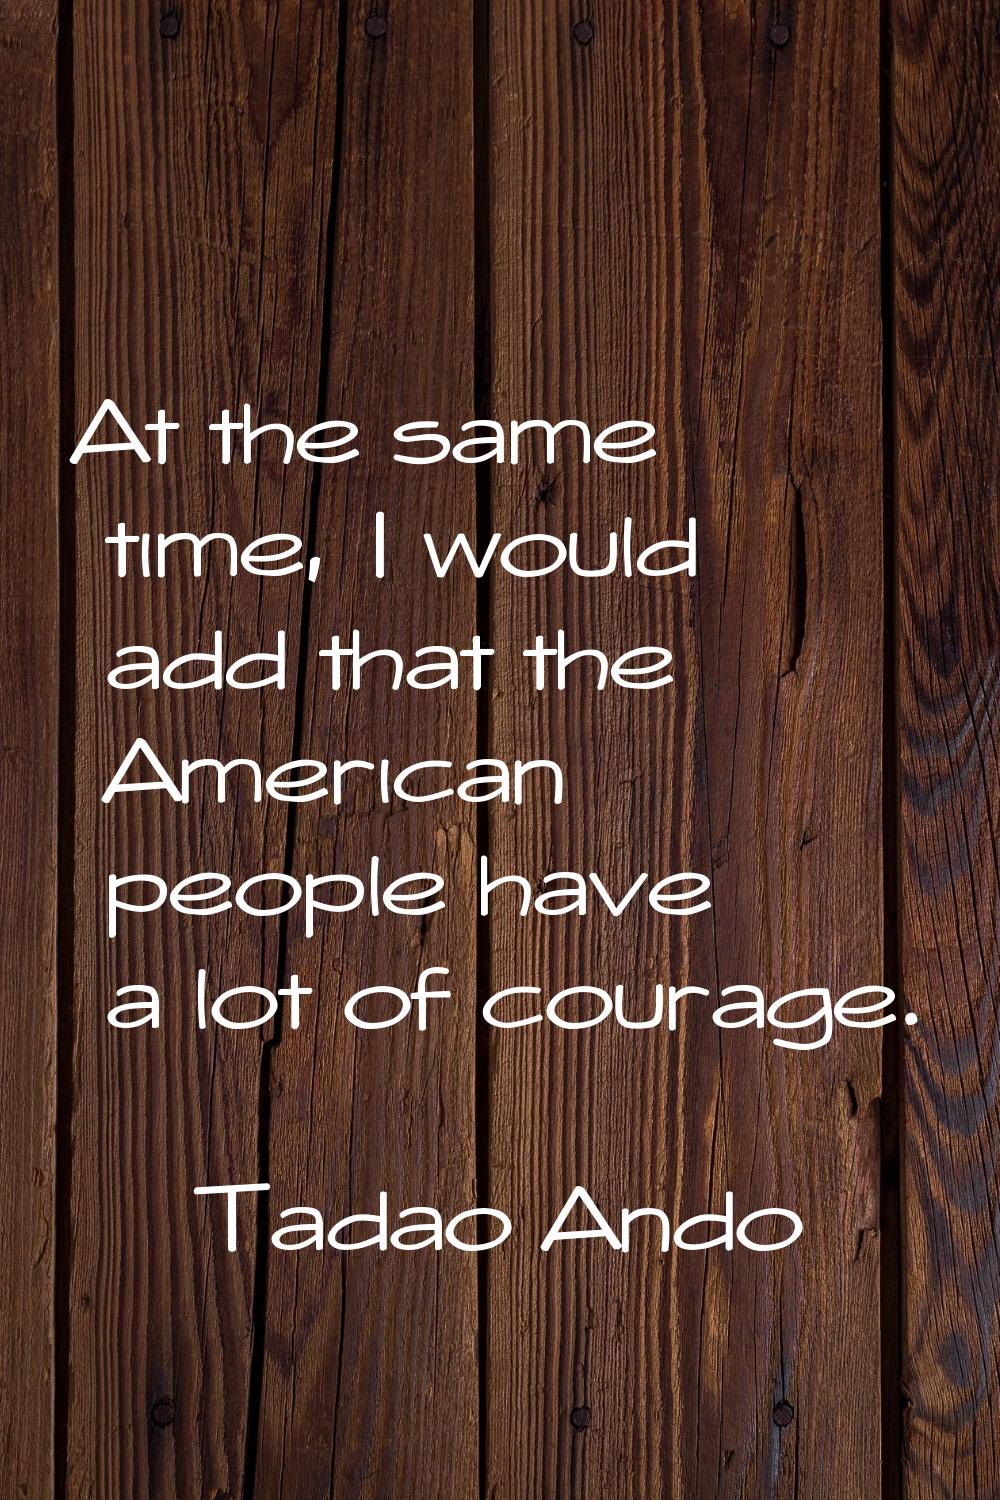 At the same time, I would add that the American people have a lot of courage.